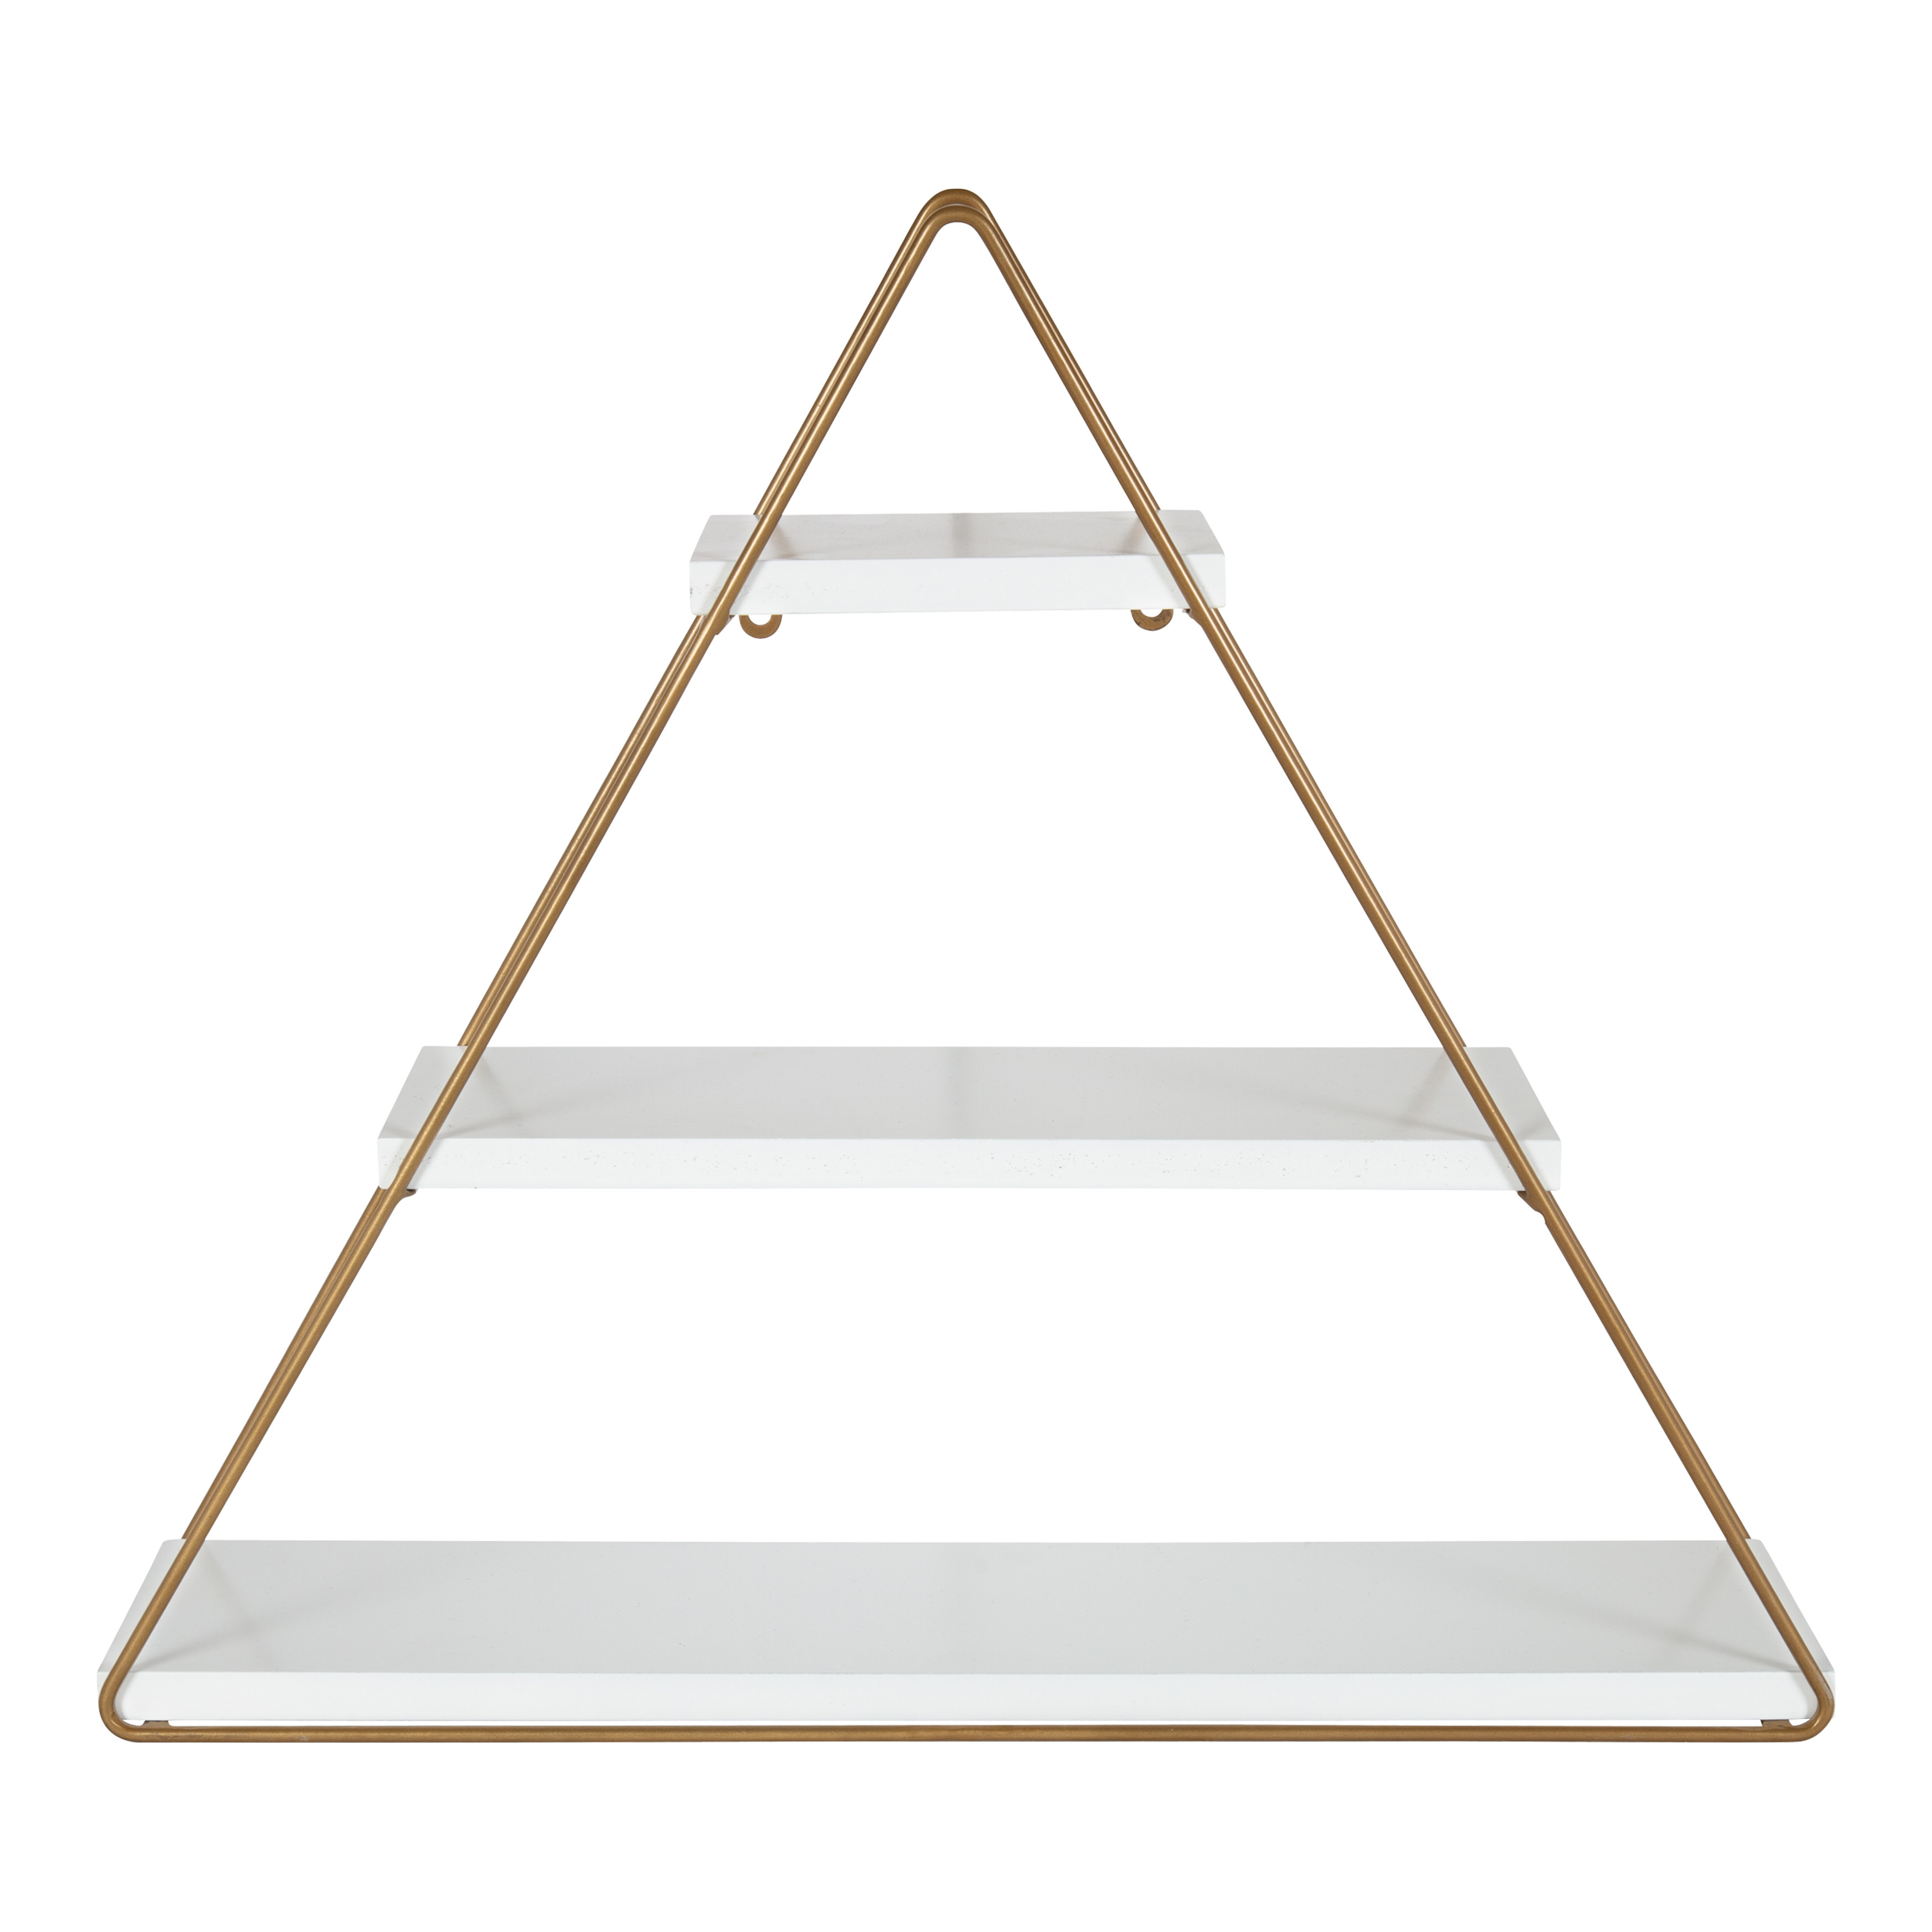 Kate and Laurel Tilde Metal Wall Shelves, 25 x 21, White and Gold, Three-Shelf Wall Organizer - image 5 of 6